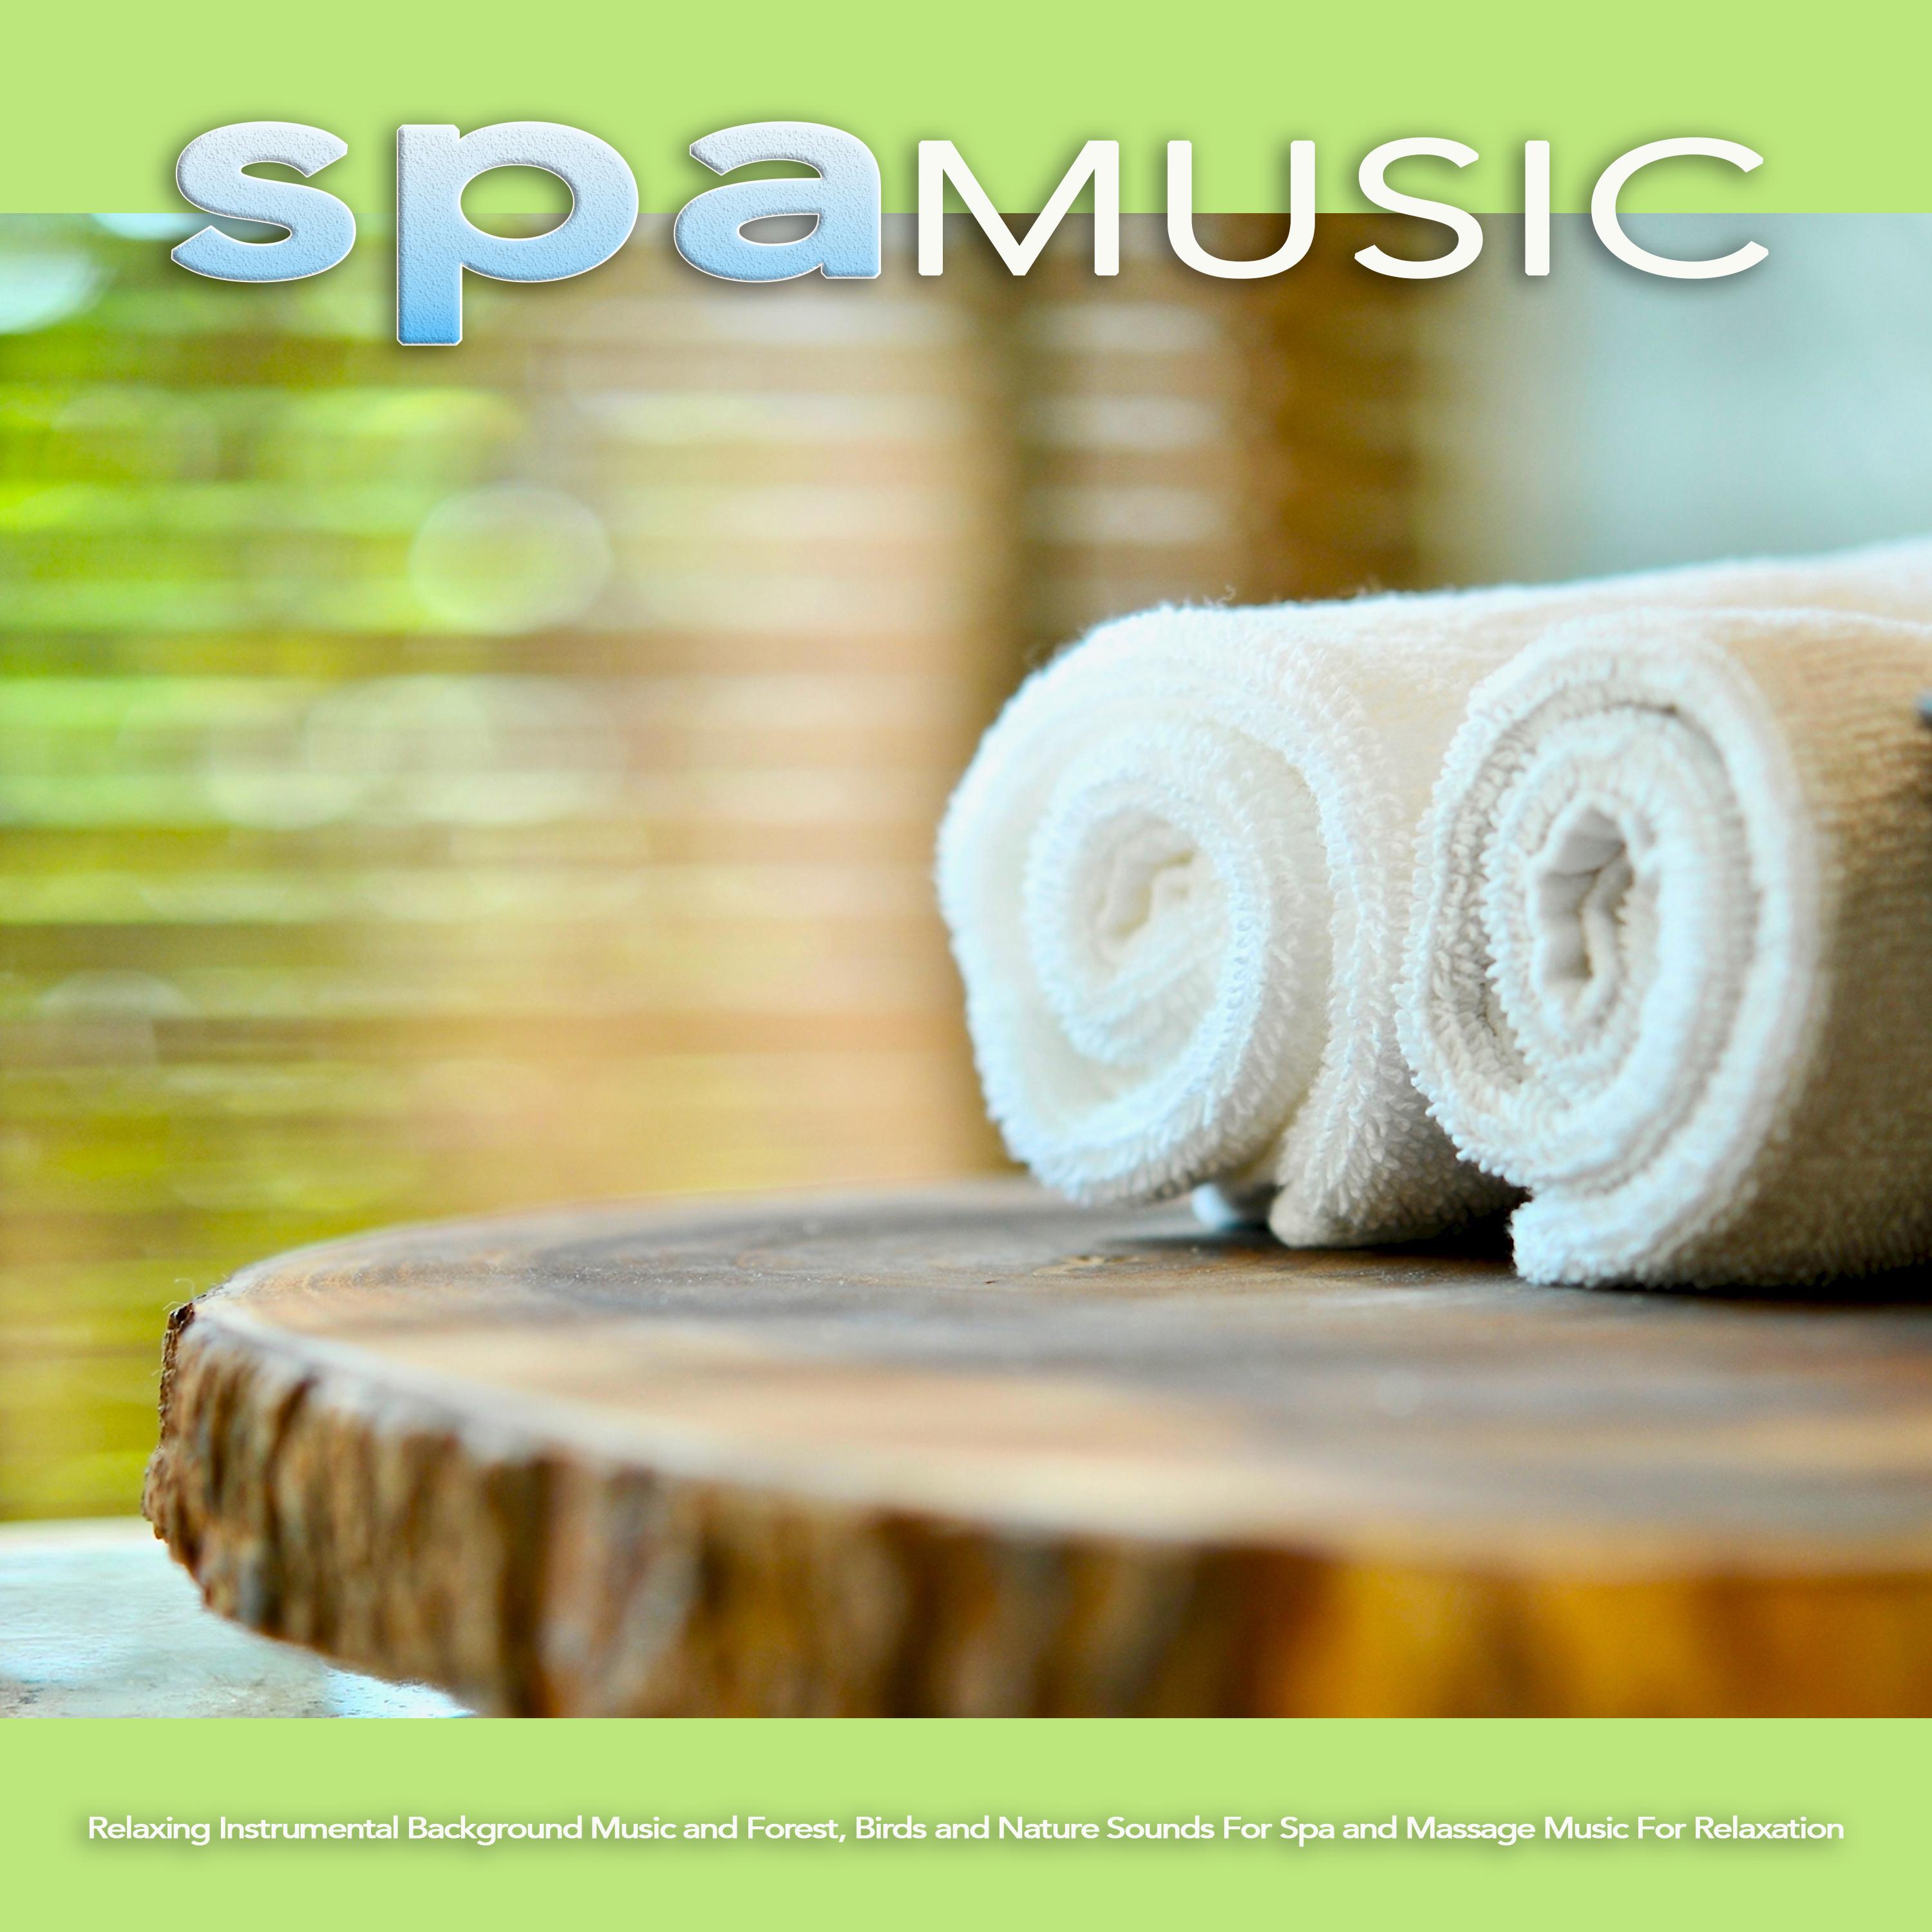 Spa Music: Relaxing Instrumental Background Music and Forest, Birds and Nature Sounds For Spa and Massage Music For Relaxation